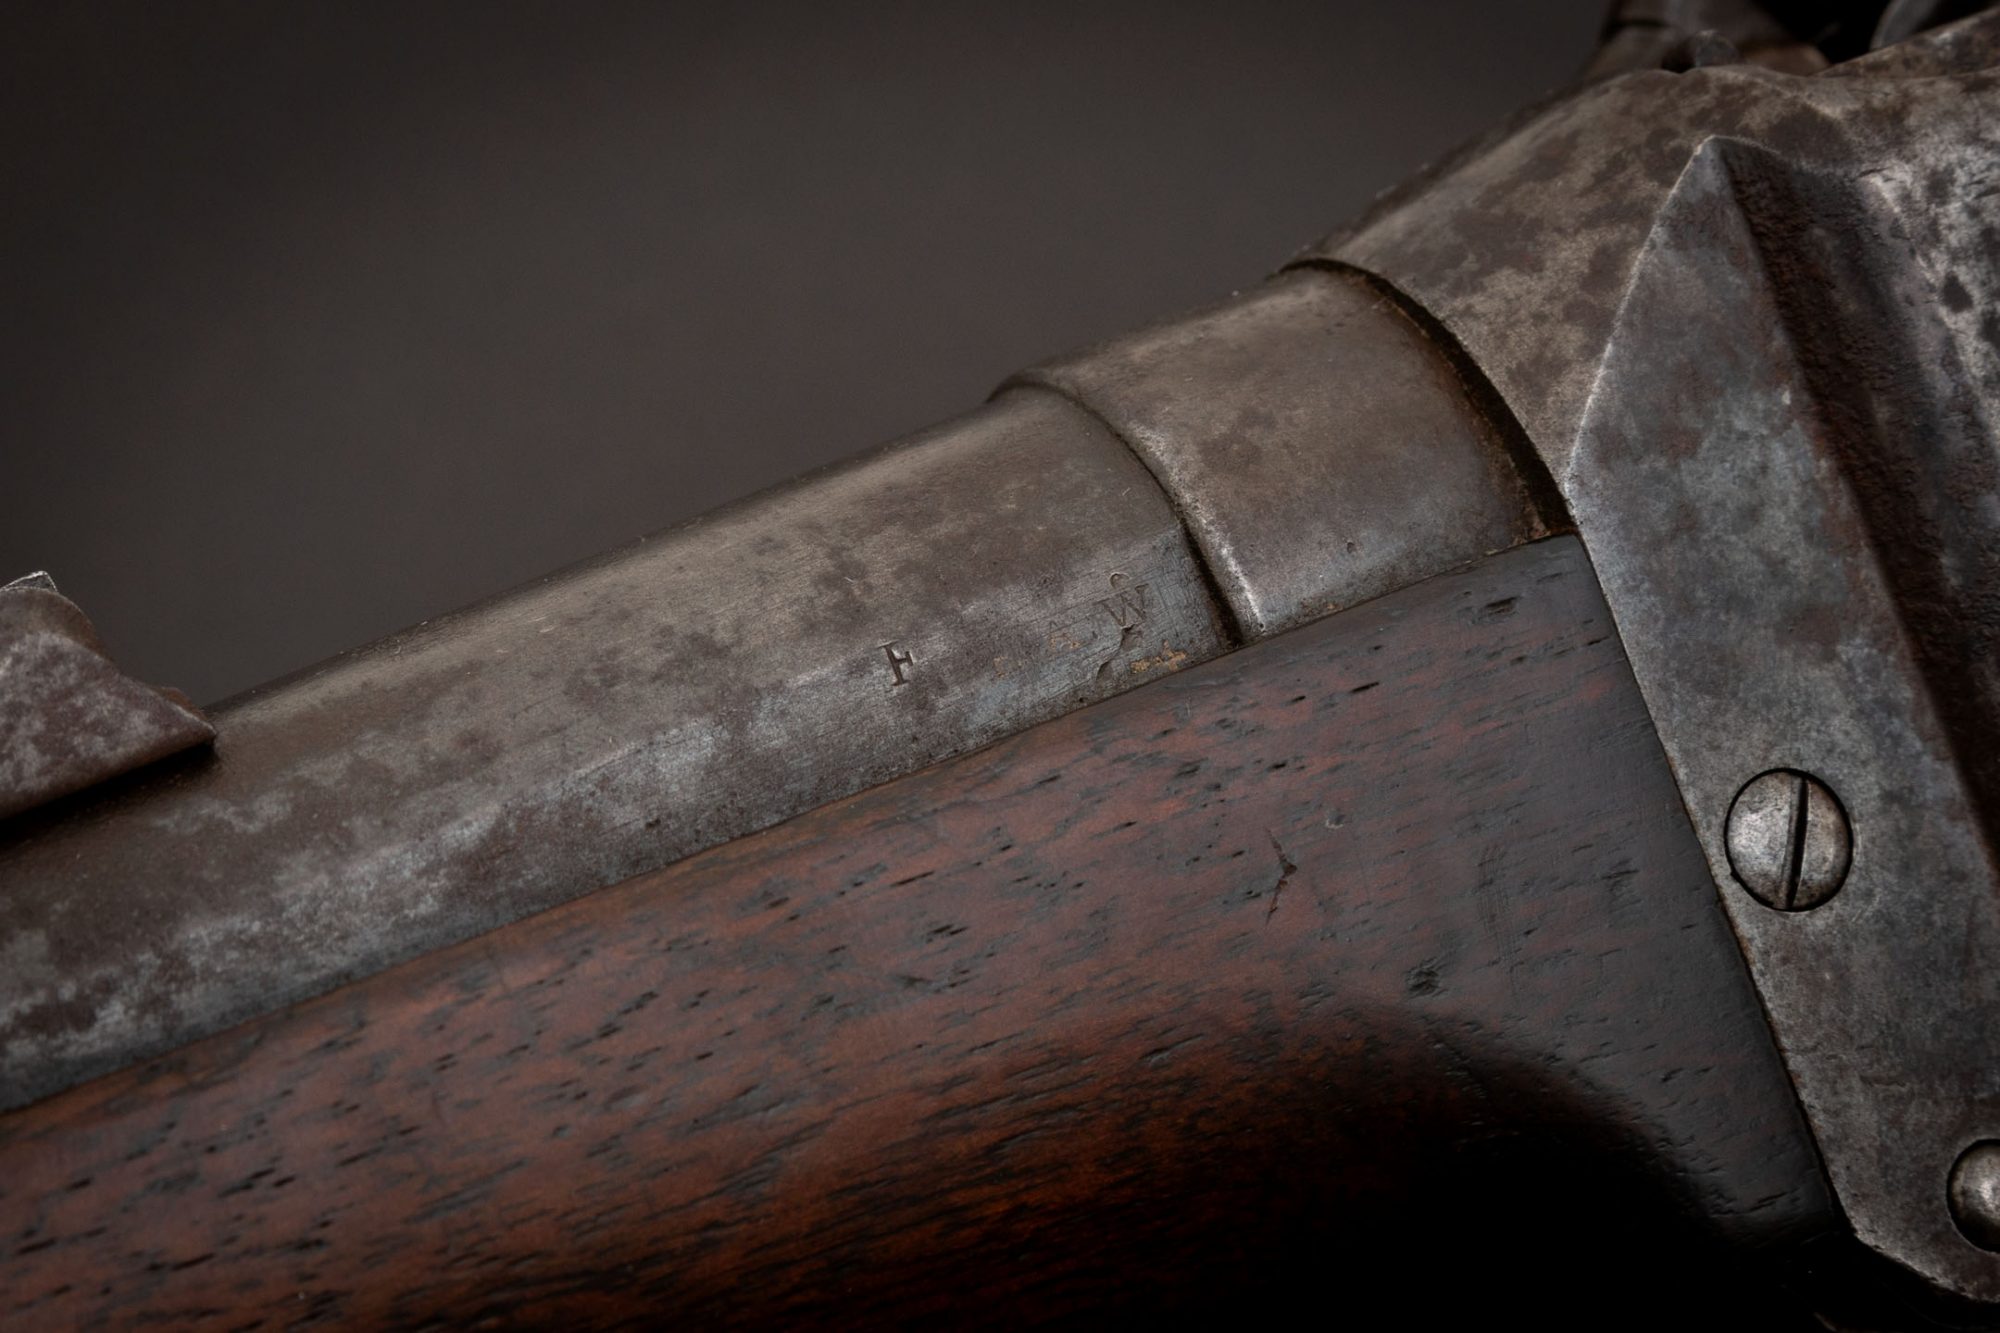 Sharps Model 1859 serial number C6959, for sale by Turnbull Restoration of Bloomfield, NY